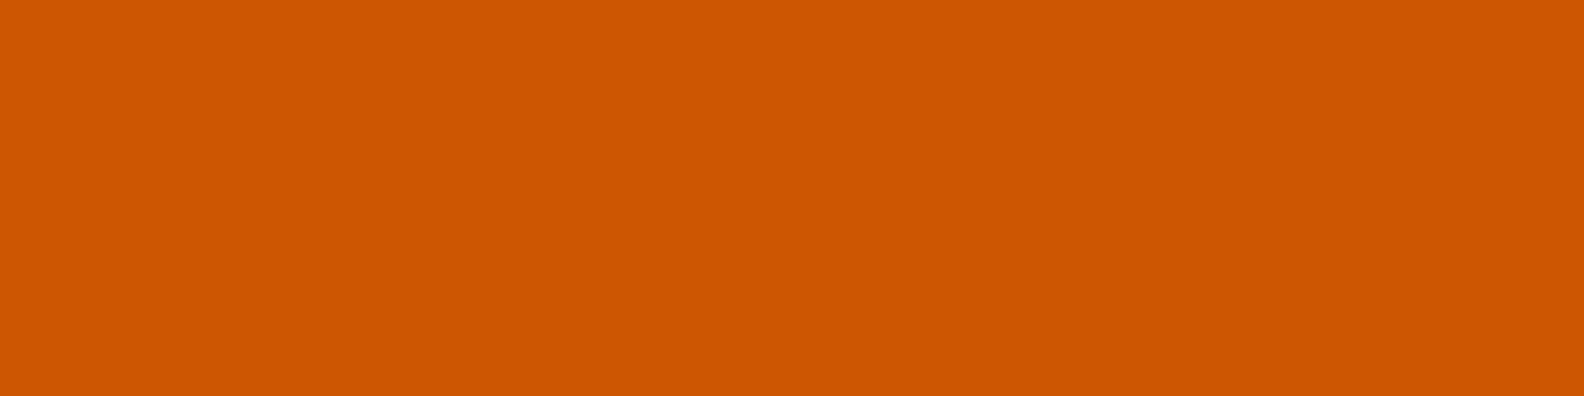 1584x396 Tenne Tawny Solid Color Background